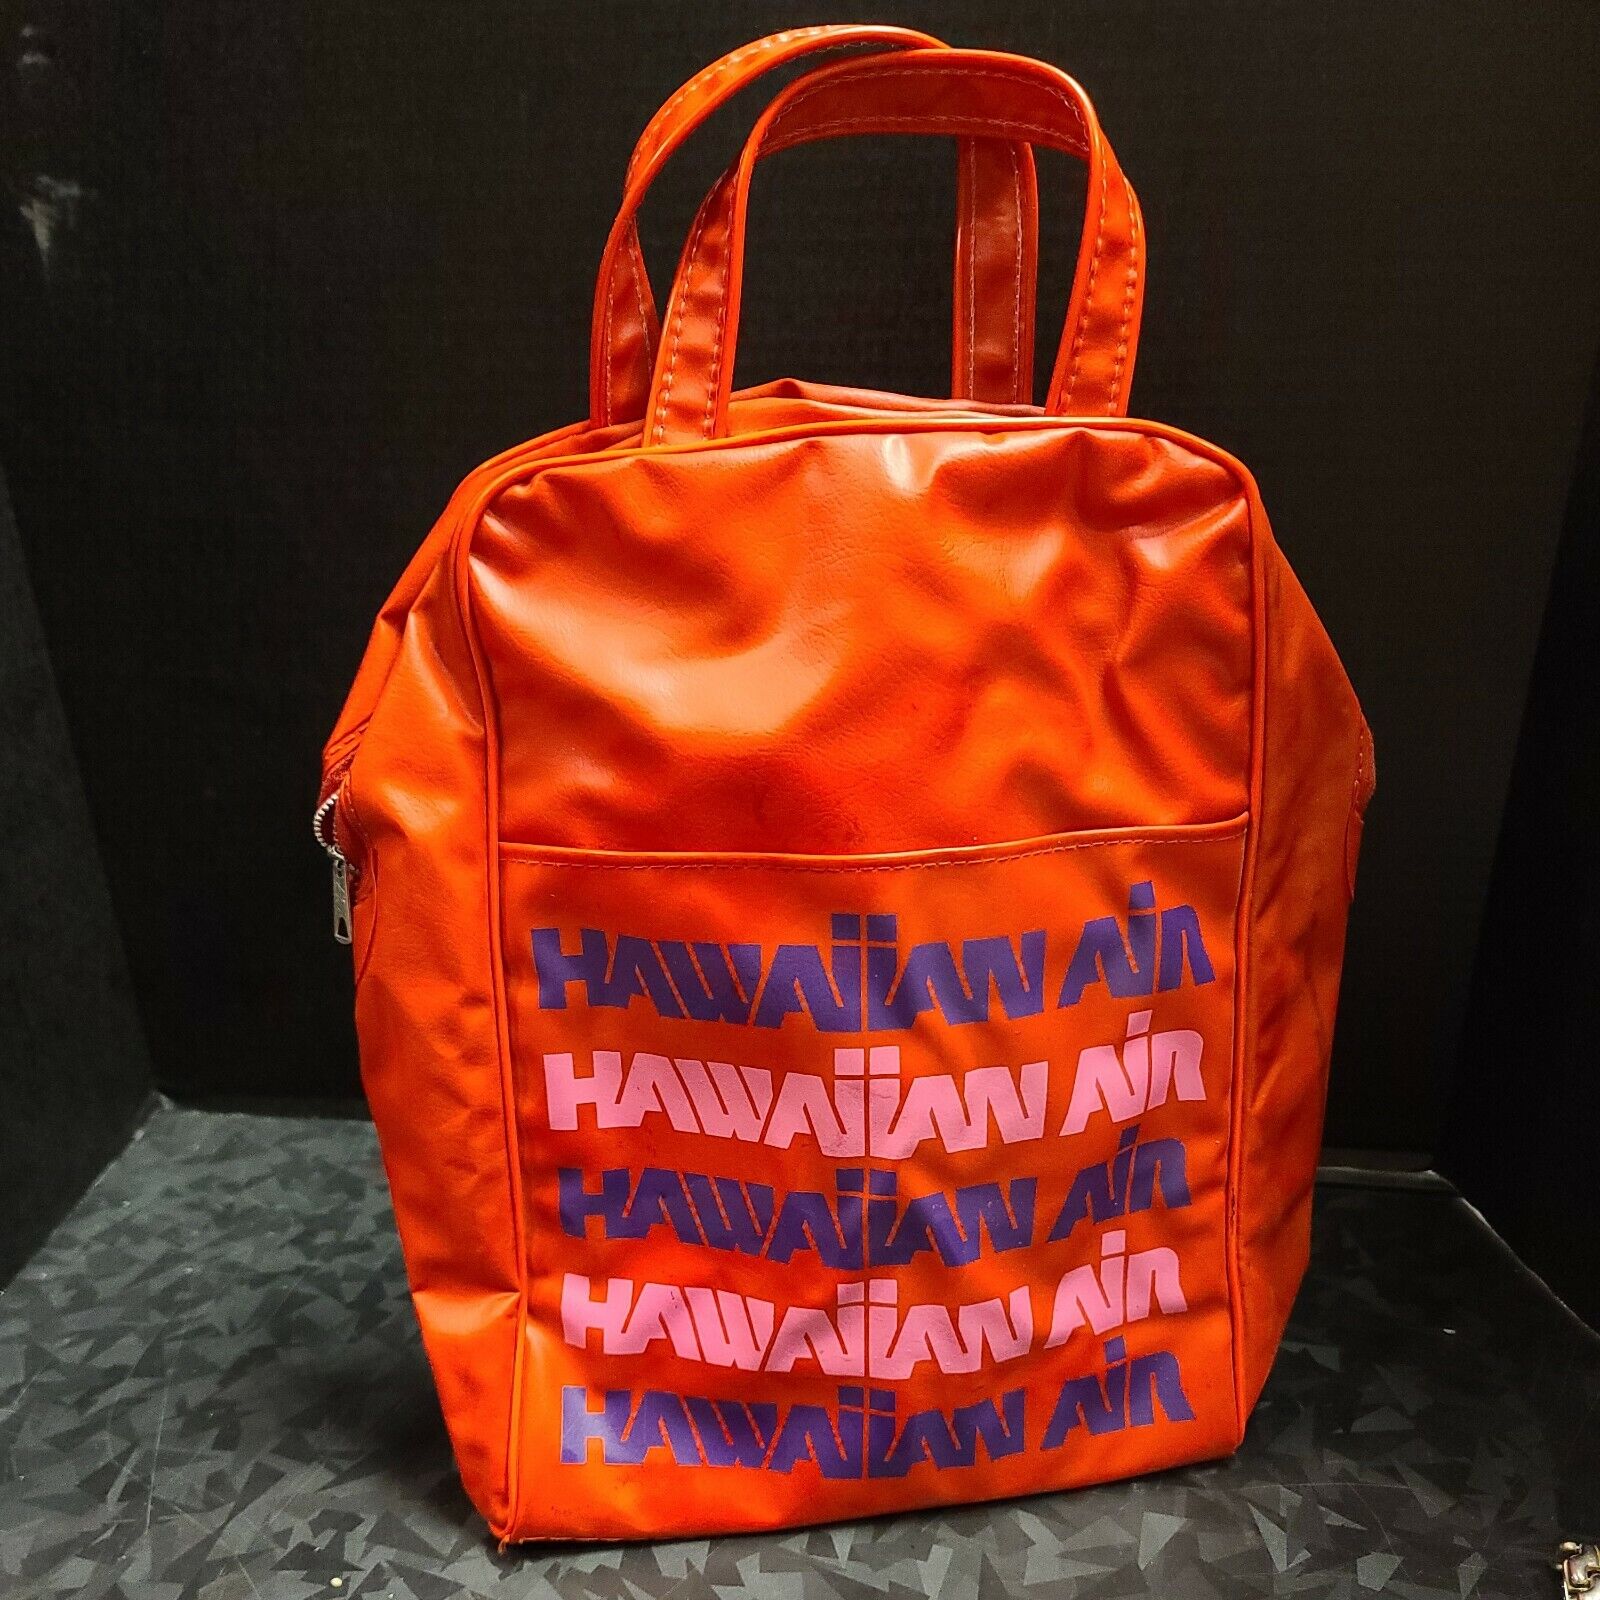 VTG Hawaiian Air Airlines Bag Vinyl Tote Travel Carry On Shoulder Luggage Plane